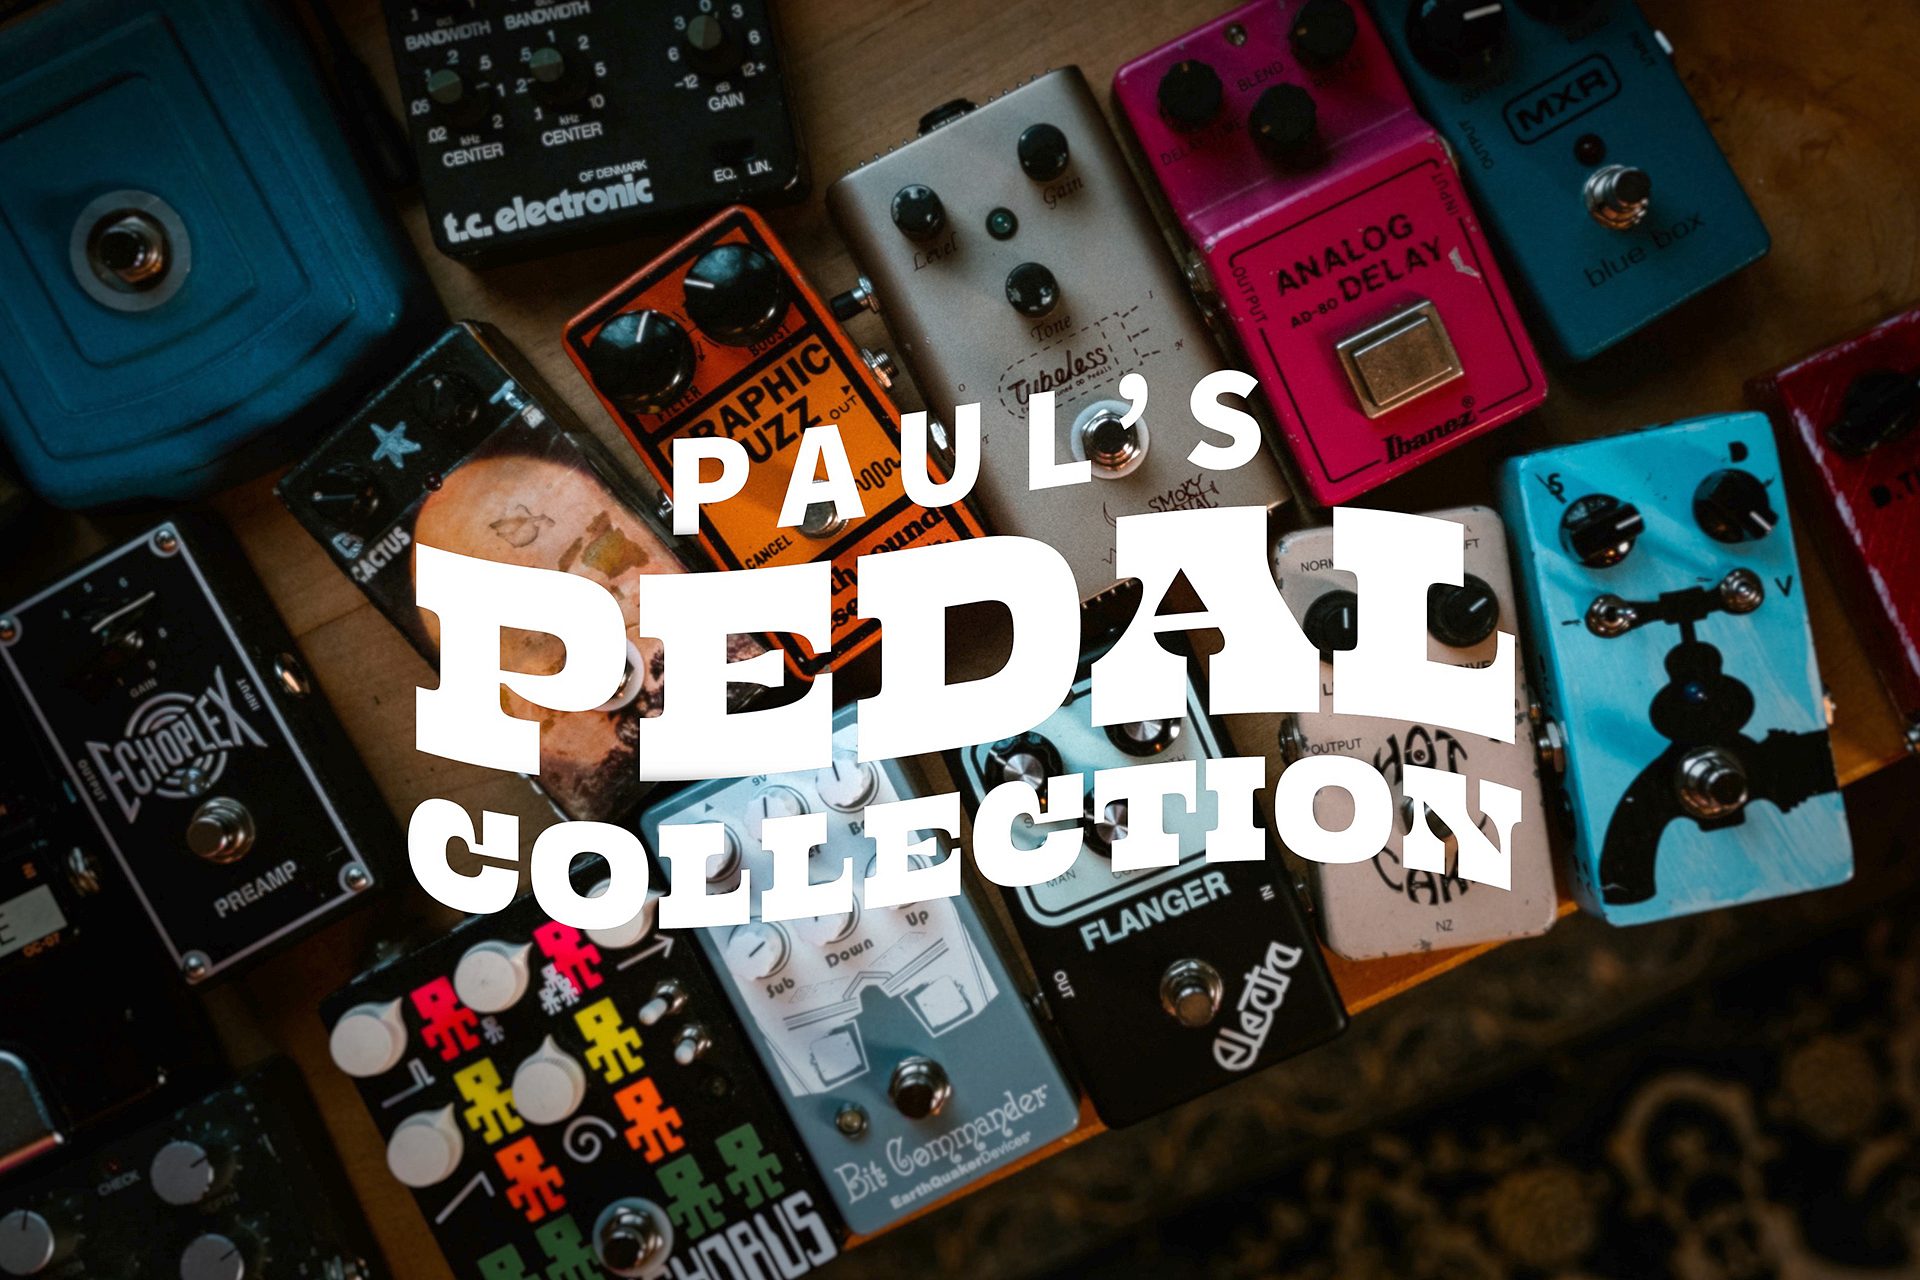 Watch Paul Reed Smith Demo His Pedal Collection!